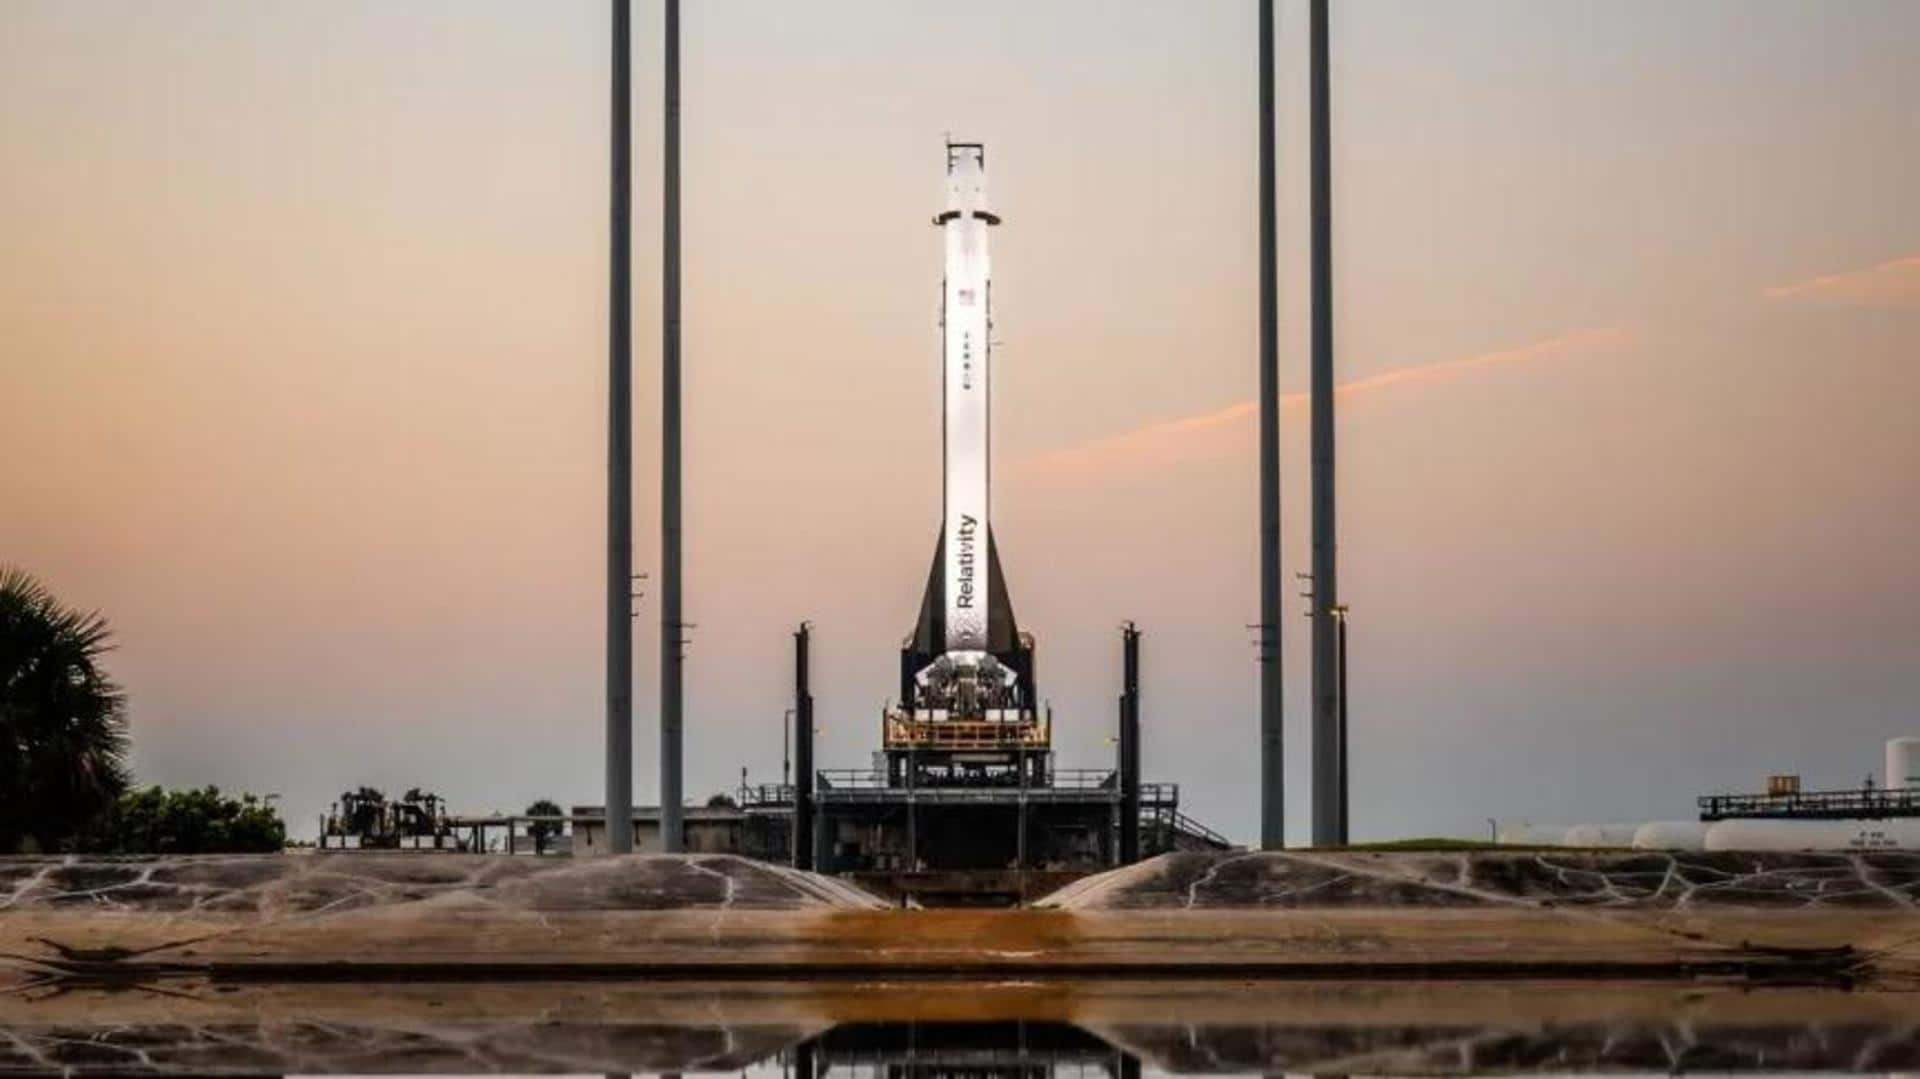 World's first 3D-printed rocket launched but didn't reach orbit